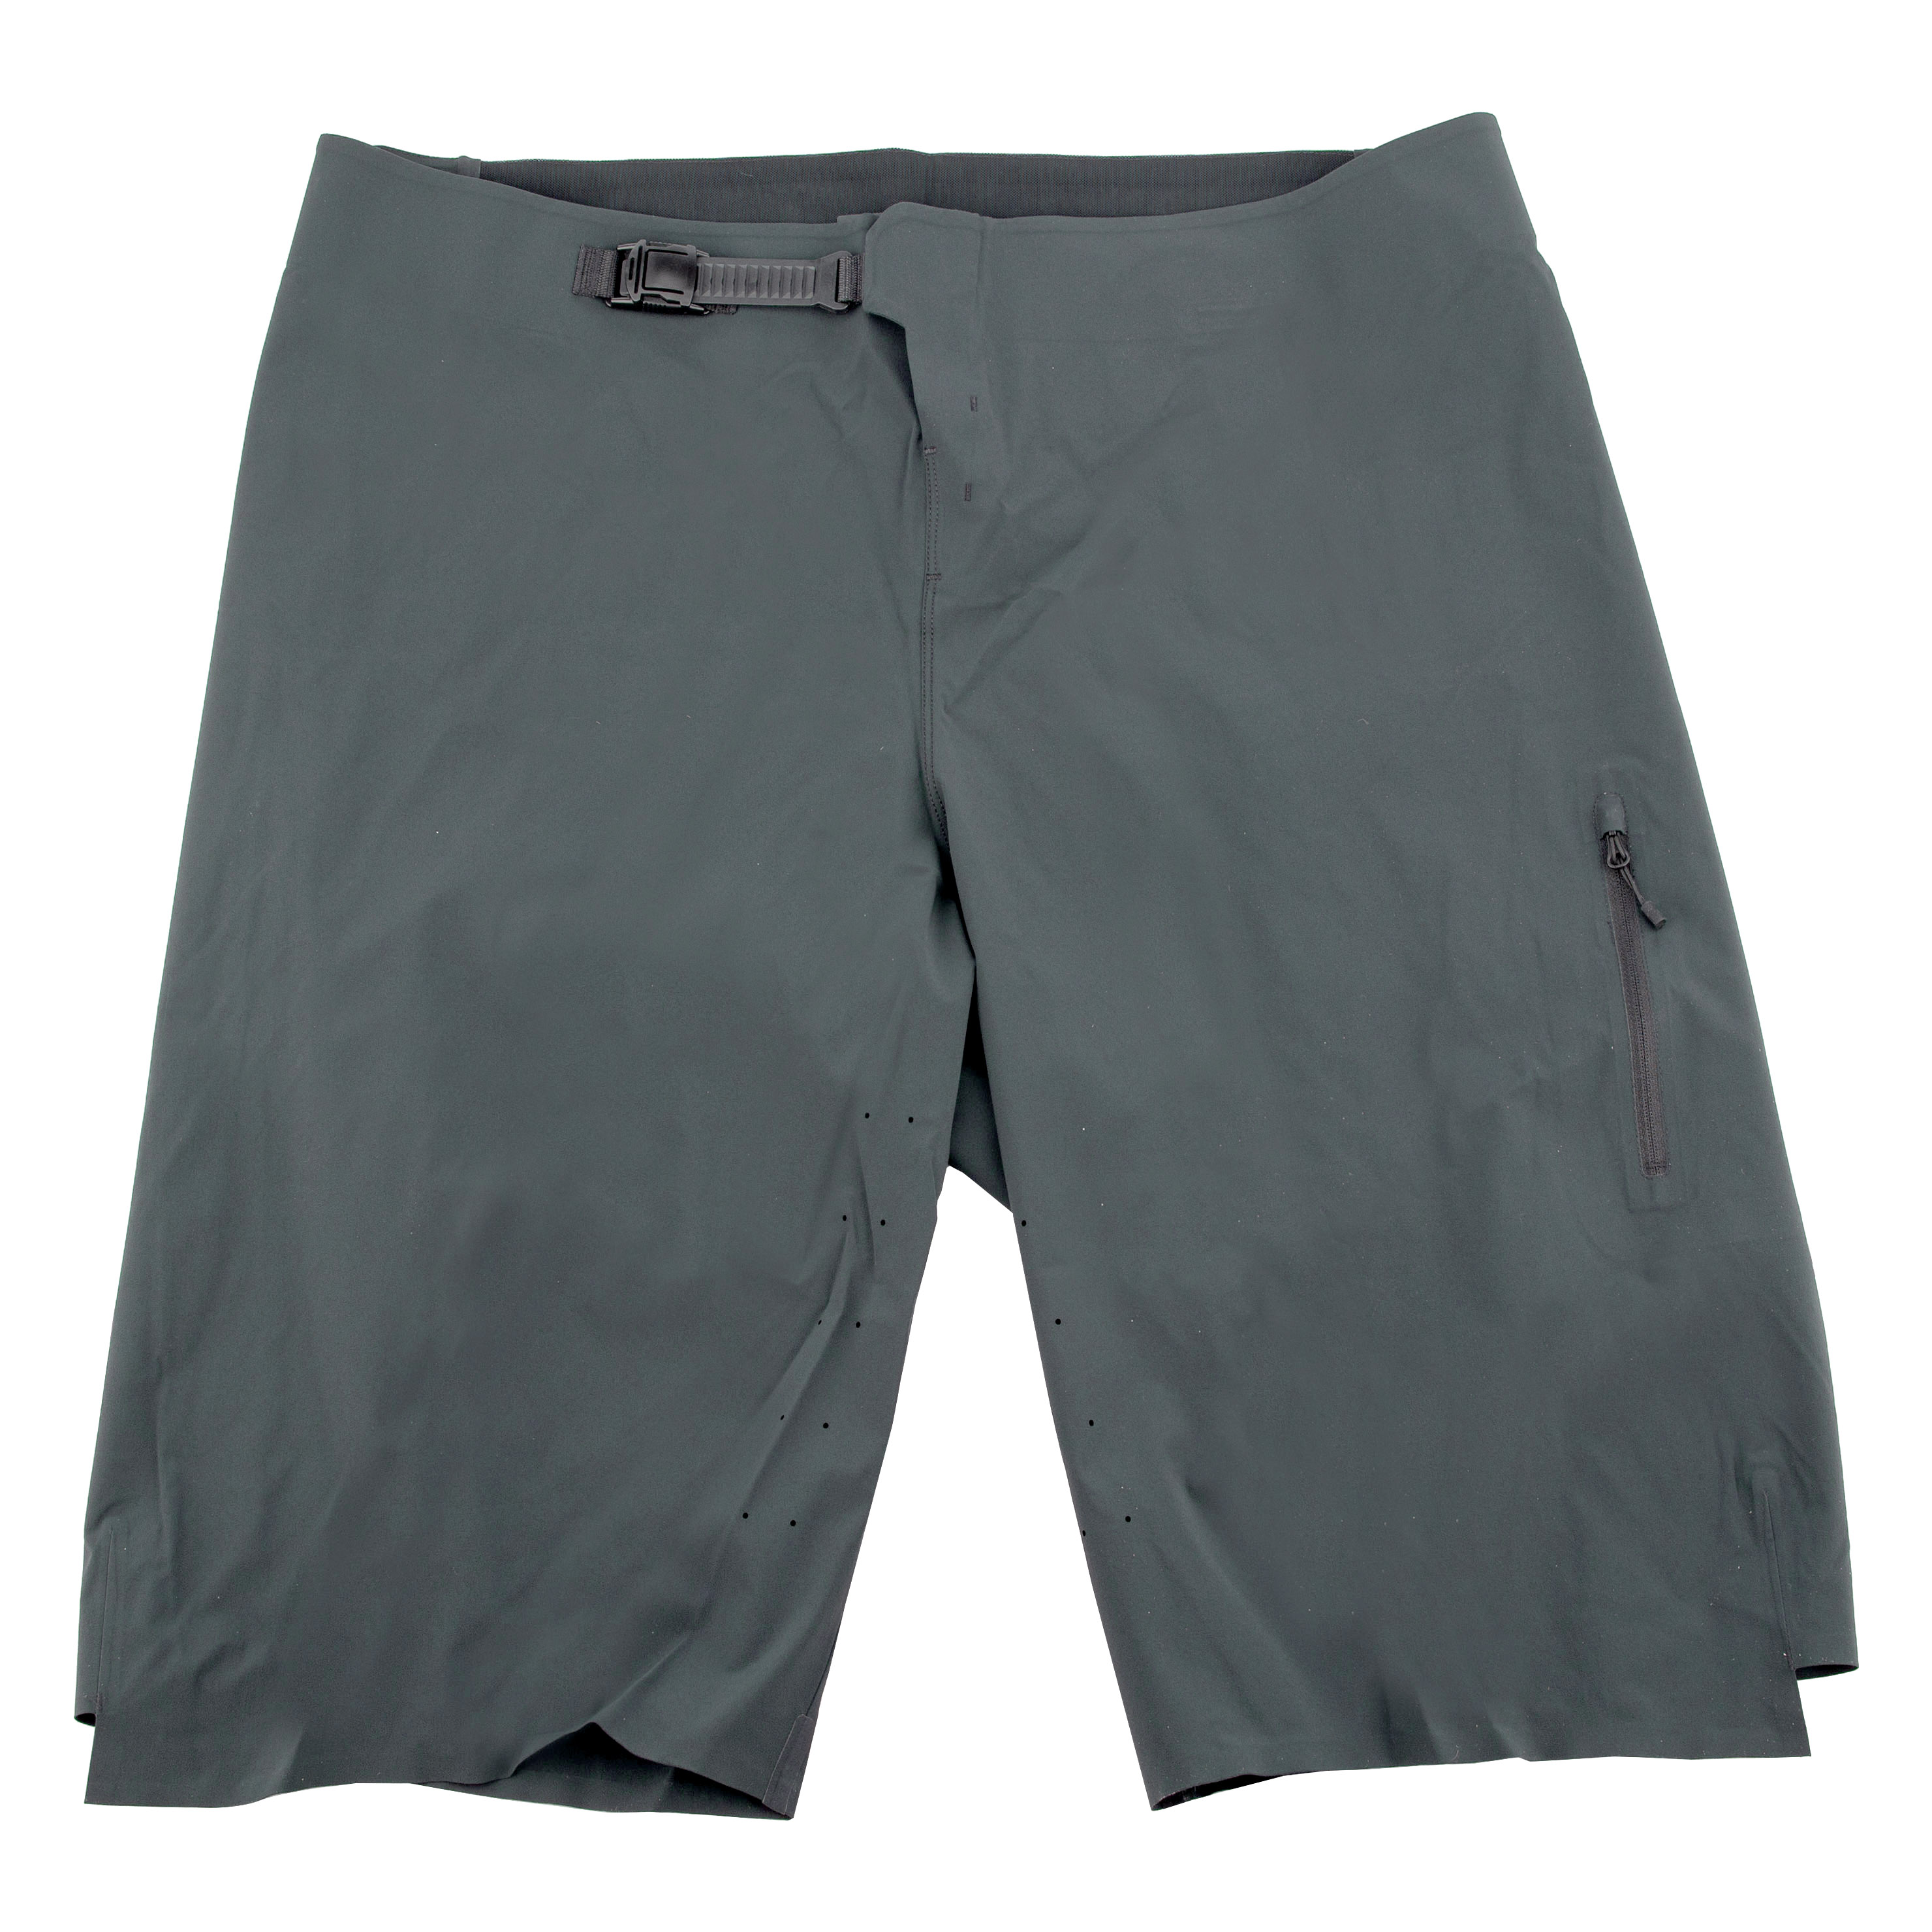 Specialized | Trail Air Short Men's | Size 34 in Cast Battleship